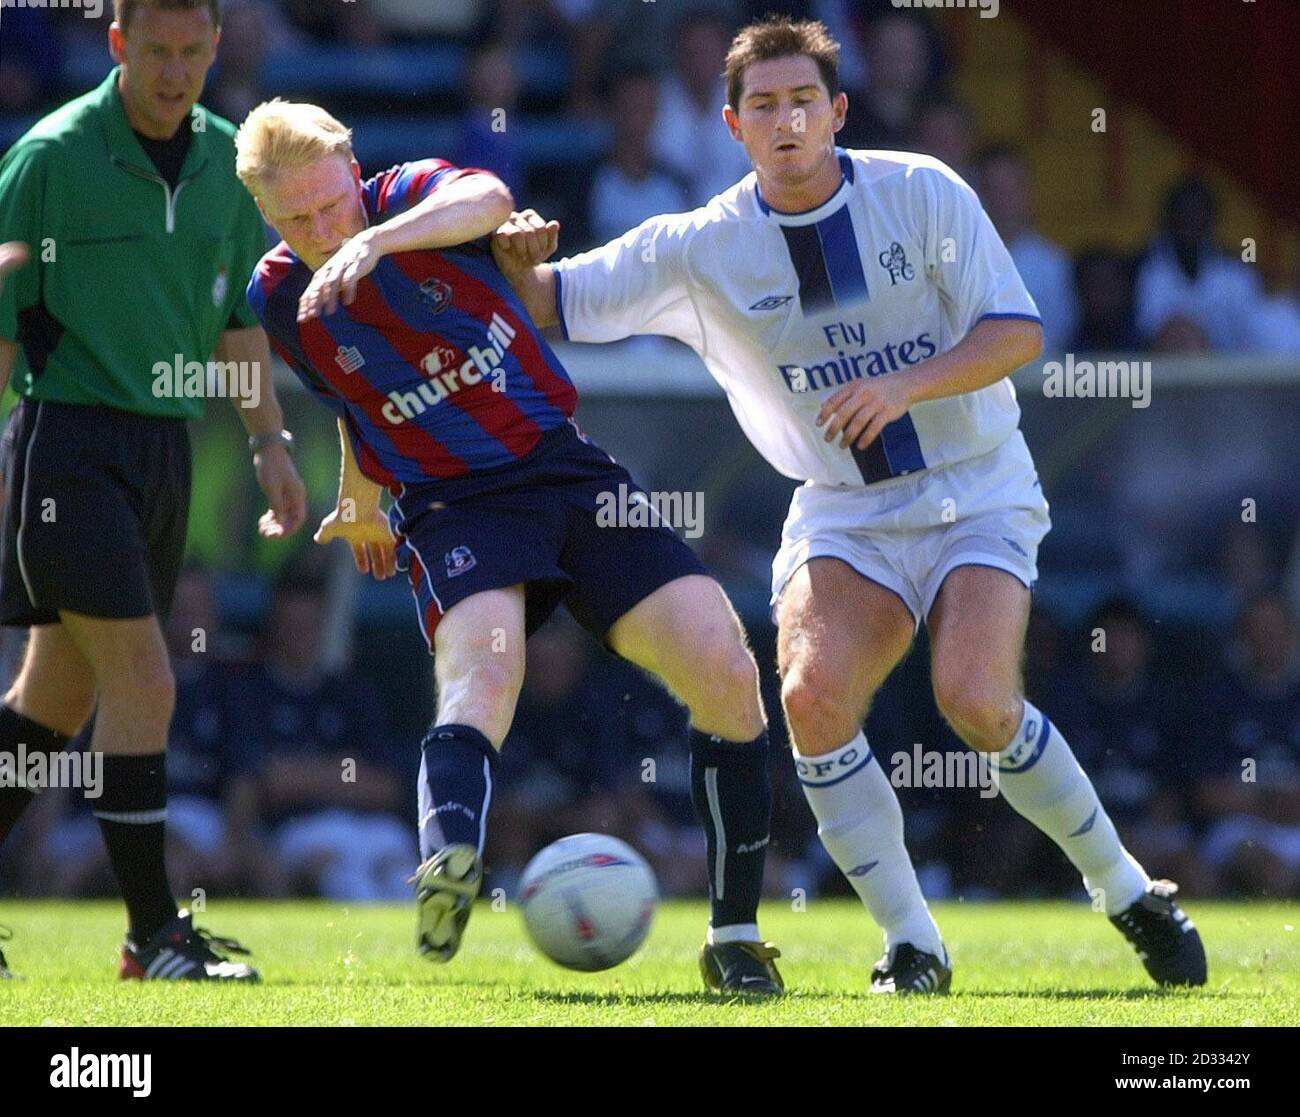 Crystal Palace's Aki Riihilahti (left) and Chelsea's Frank Lampard in action during their pre-season friendly match at Selhurst Park, London.  THIS PICTURE CAN ONLY BE USED WITHIN THE CONTEXT OF AN EDITORIAL FEATURE. NO WEBSITE/INTERNET USE UNLESS SITE IS REGISTERED WITH FOOTBALL ASSOCIATION PREMIER LEAGUE. Stock Photo